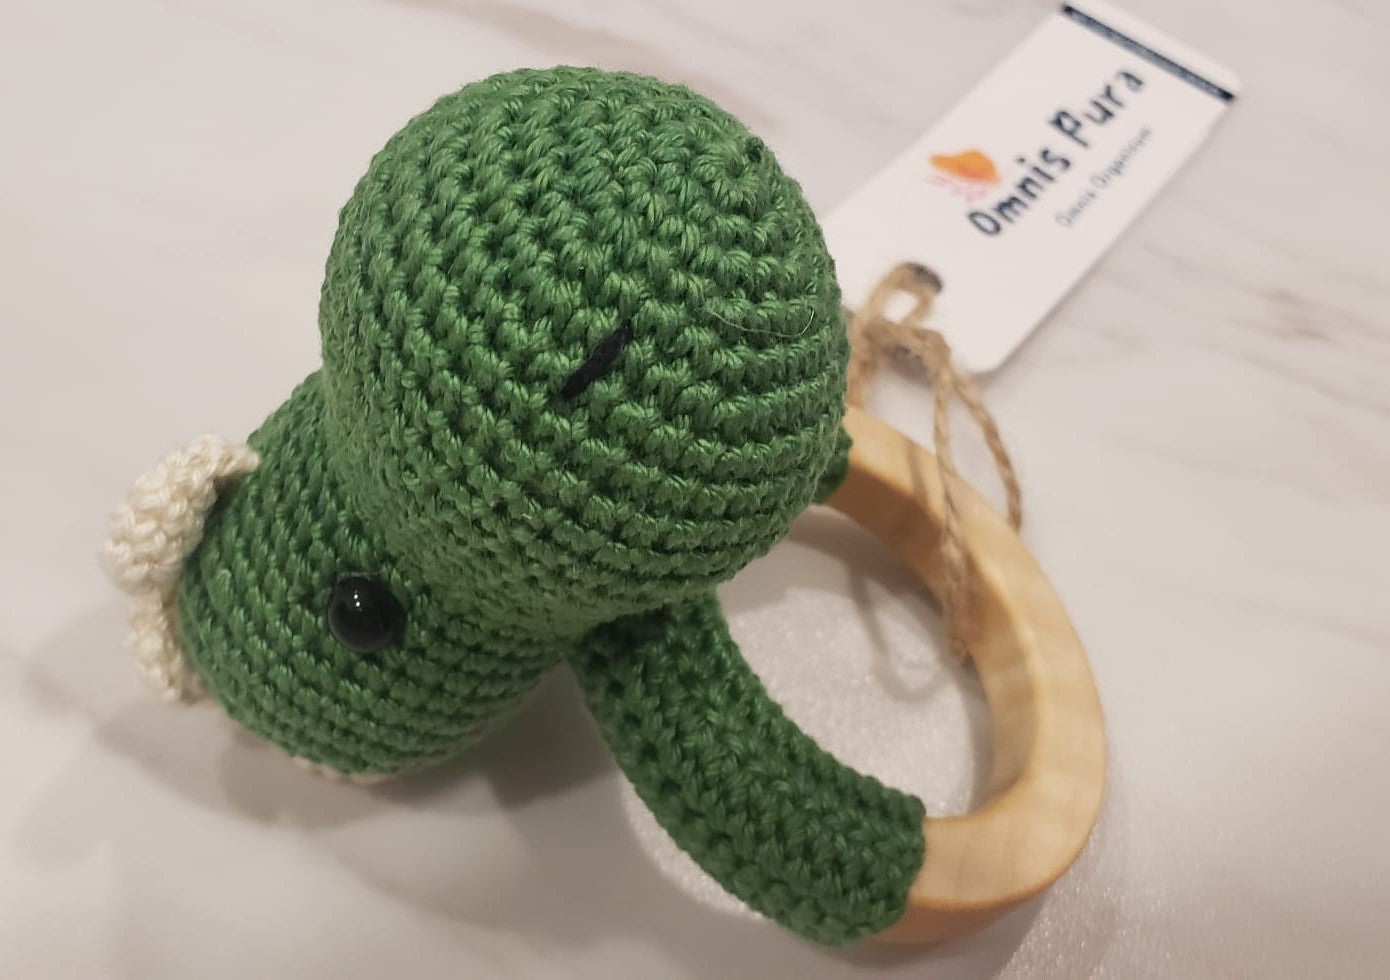 Handmade 100% Organic Cotton Crotchet Teether / Rattle - Different Design, Eco-Friendly Product, Plastic-Free